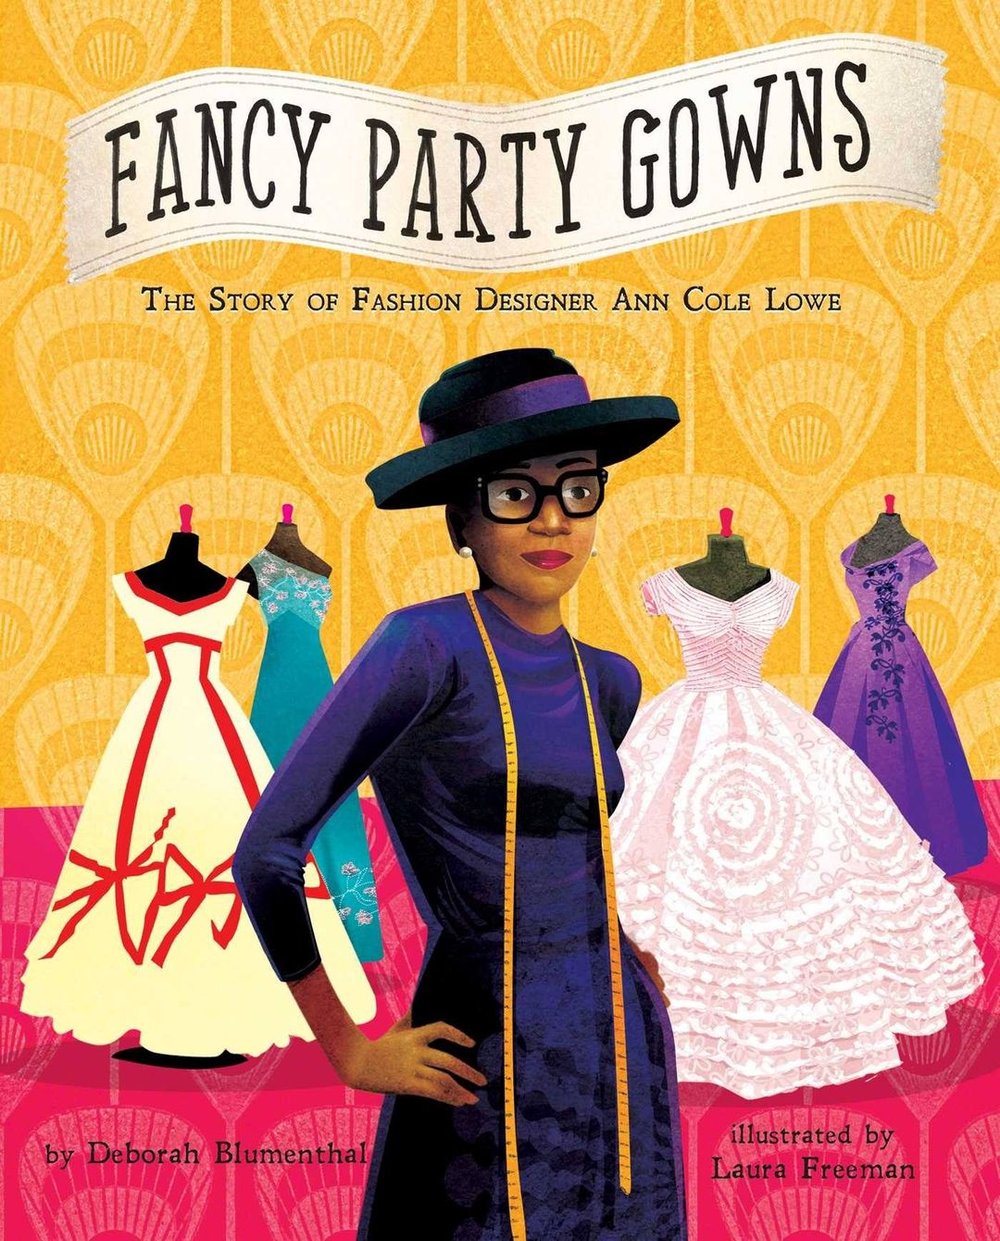 Fancy Party Gowns (Hardcover)